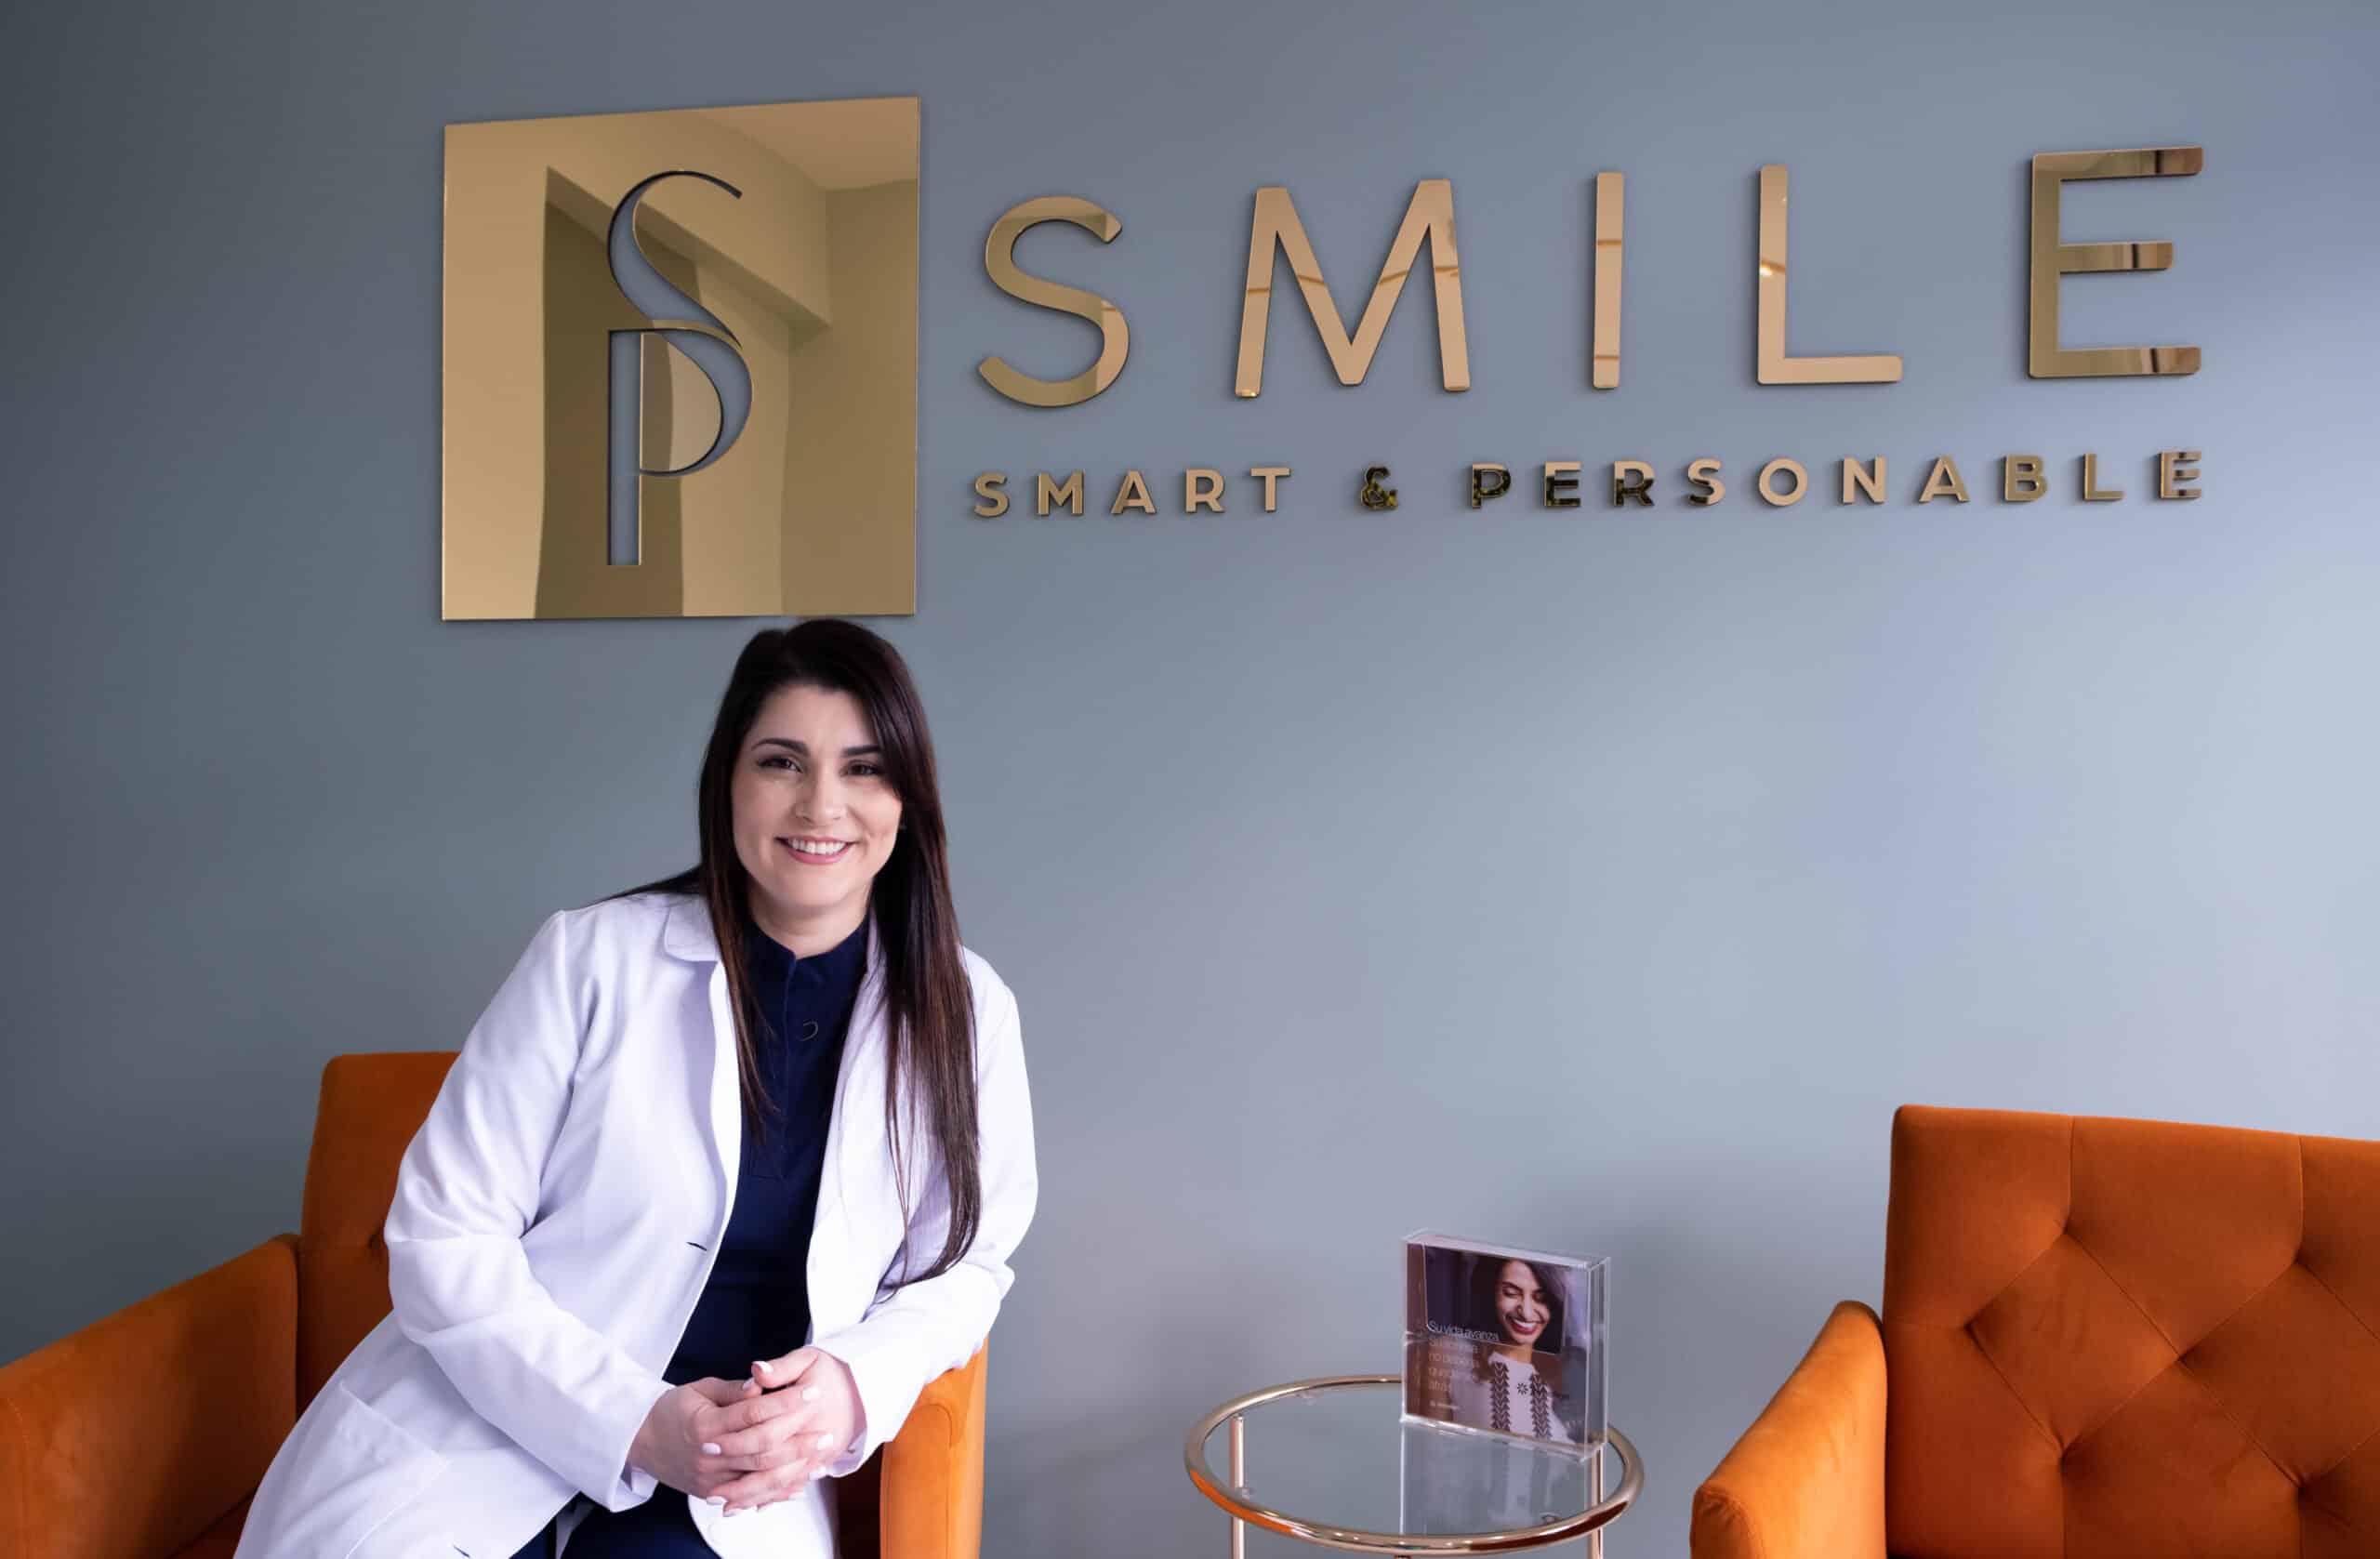 Dr. Susel Perez at SP Smile Dentistry modern lobby.